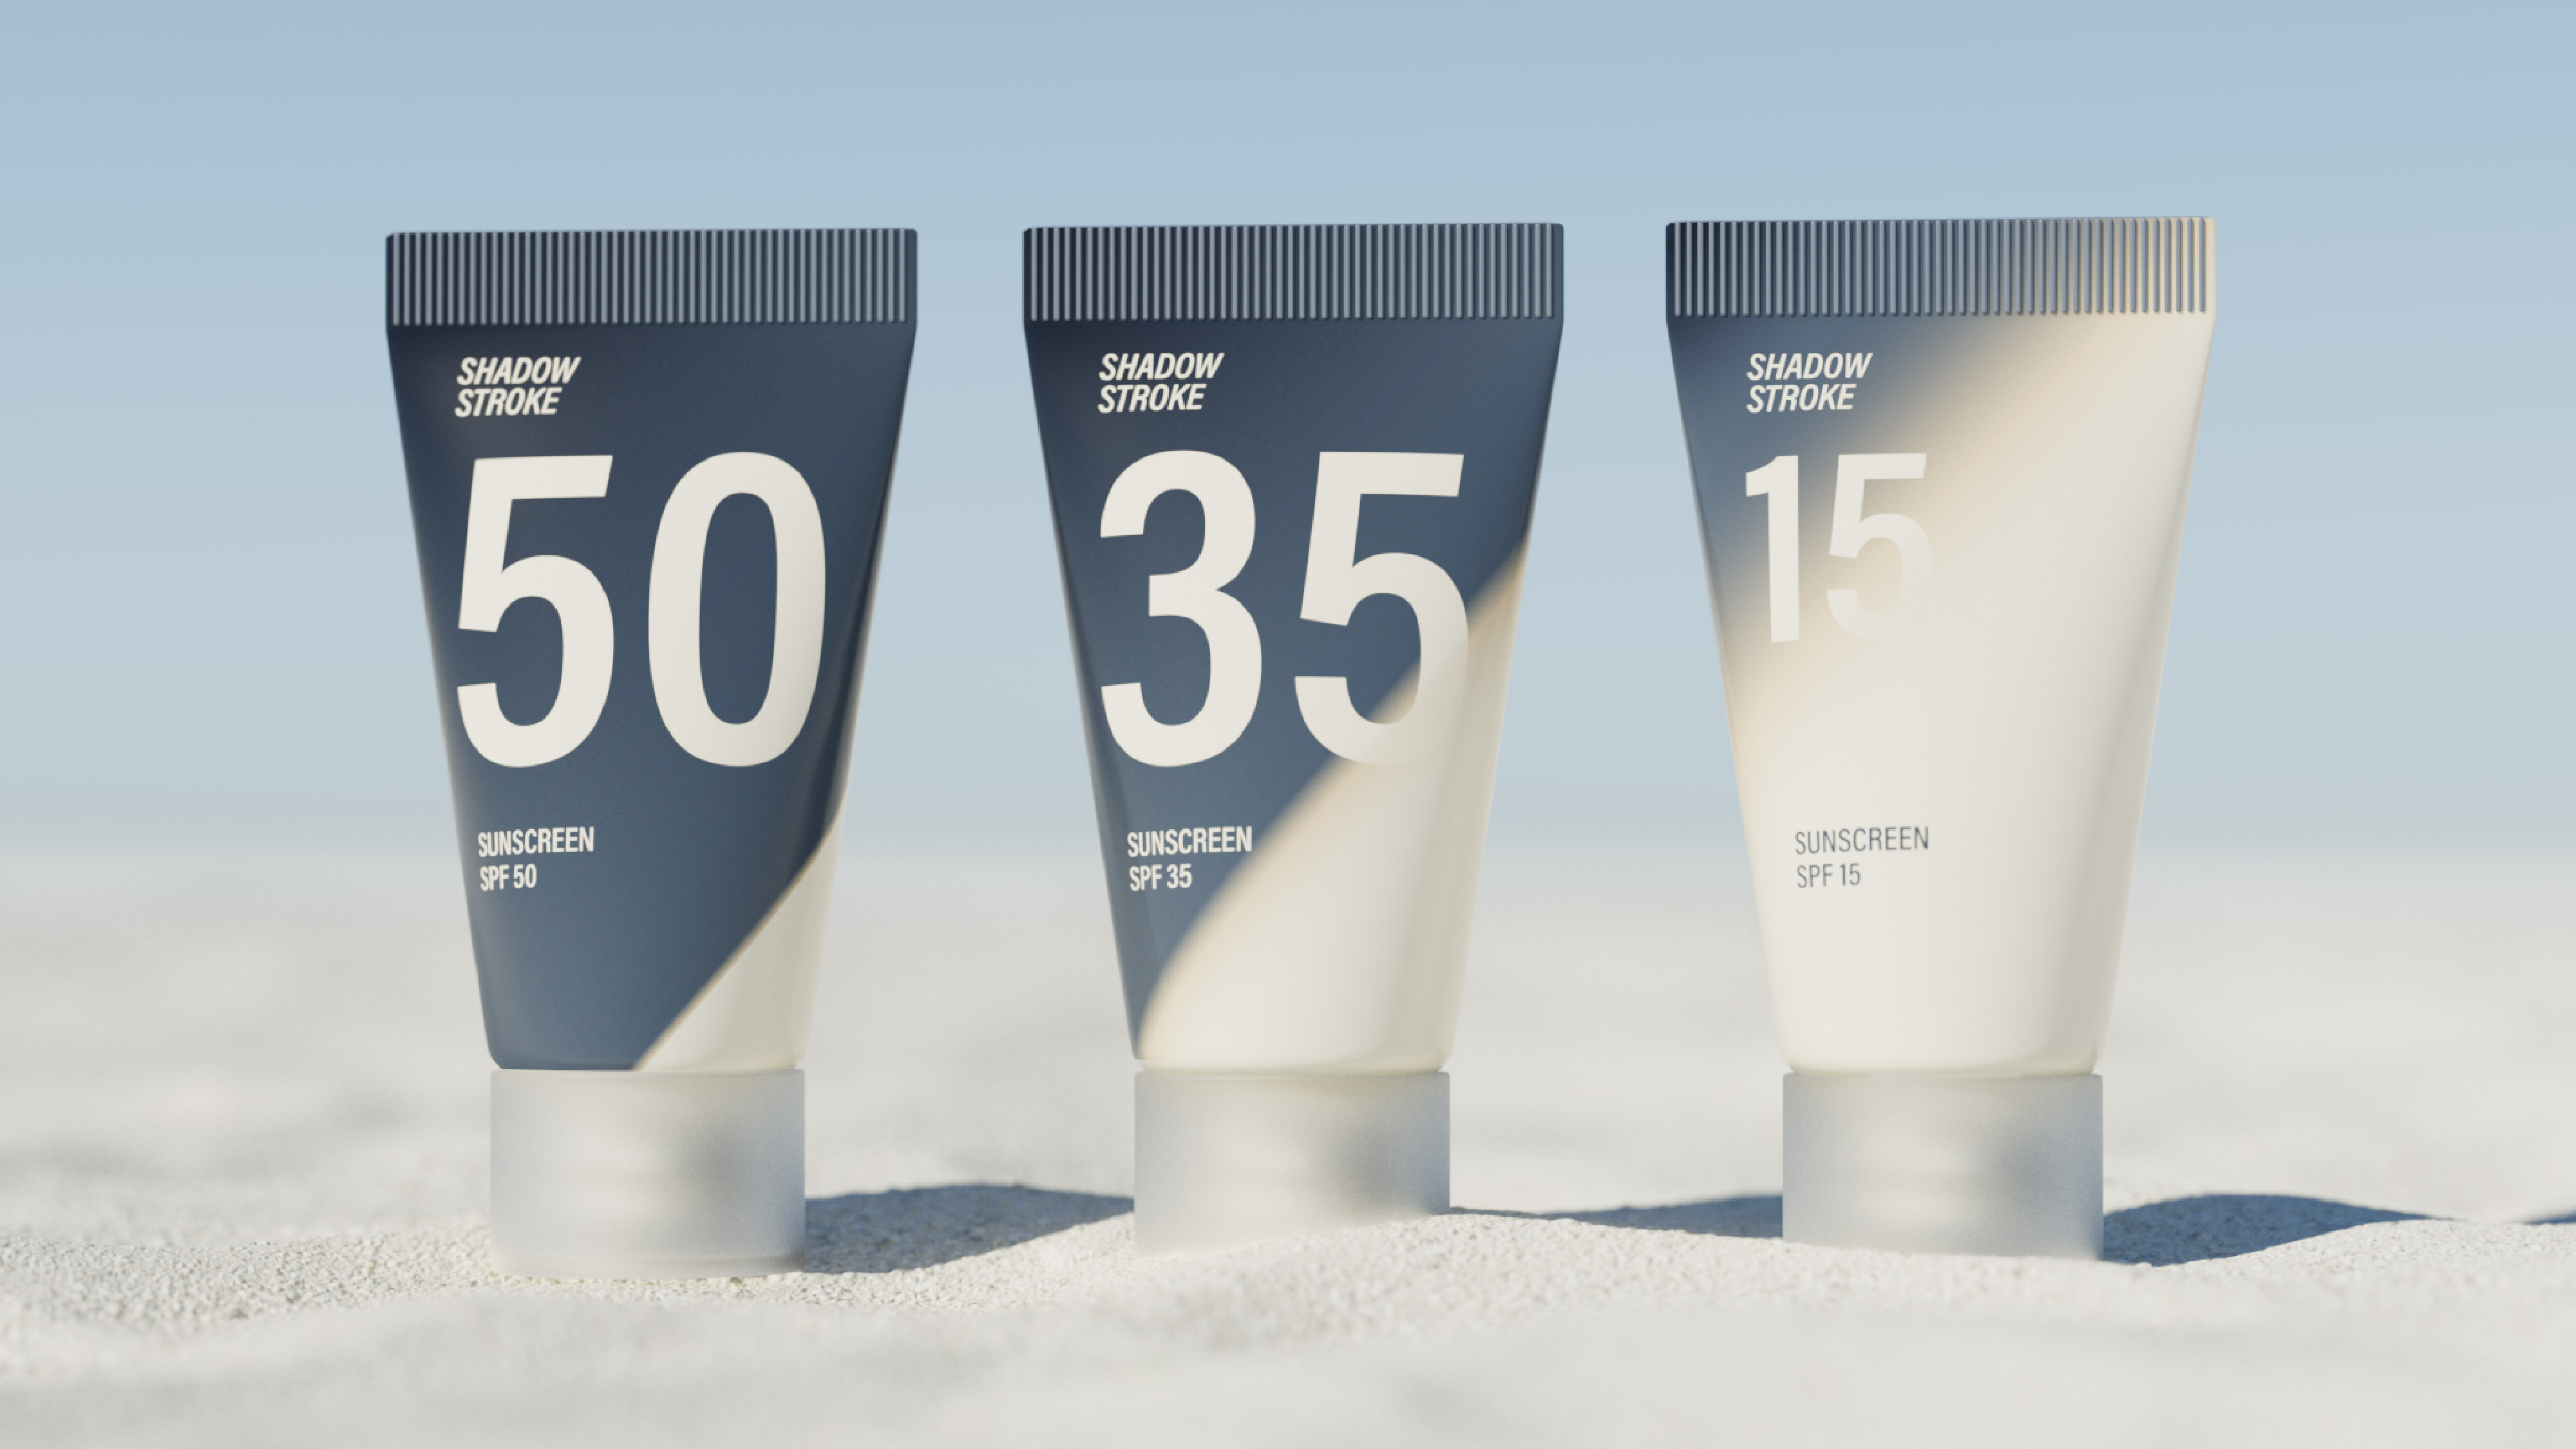 Student Packaging Design Concept of the Shadow Stroke Sunscreen Line